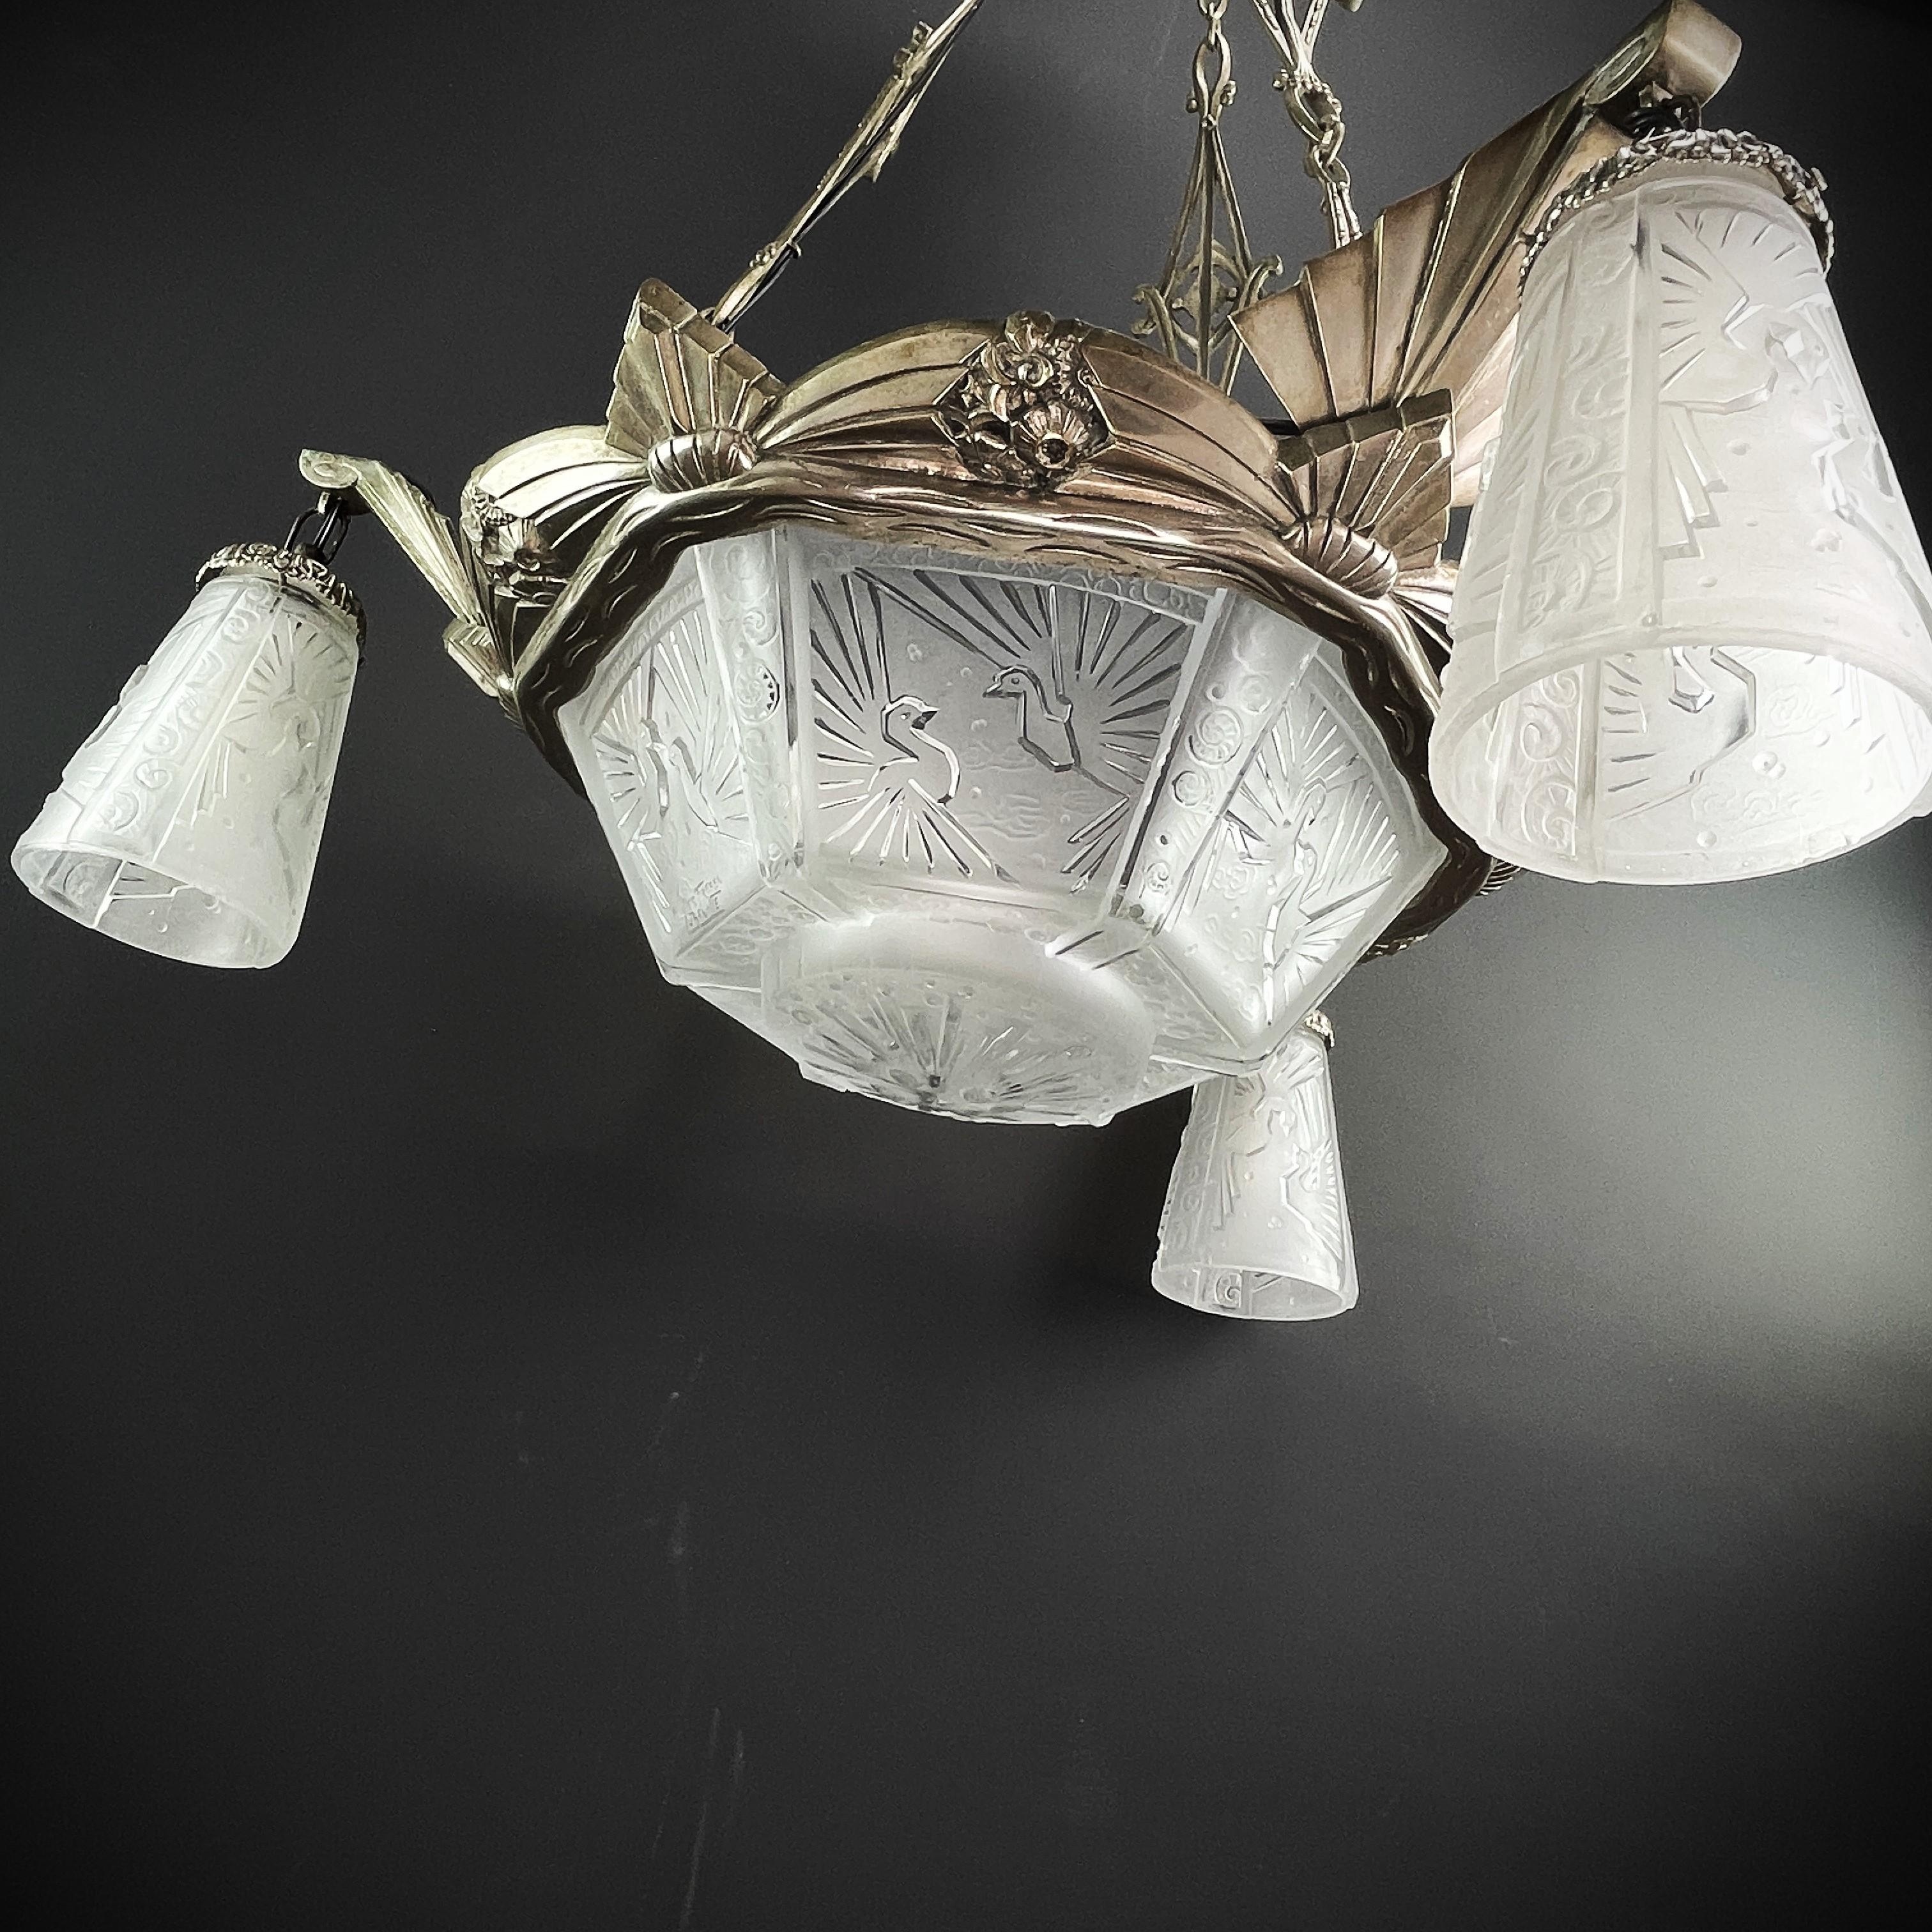 French Art Deco Chandelier by Muller Freres Luneville & Atelier Petitot , 1930s For Sale